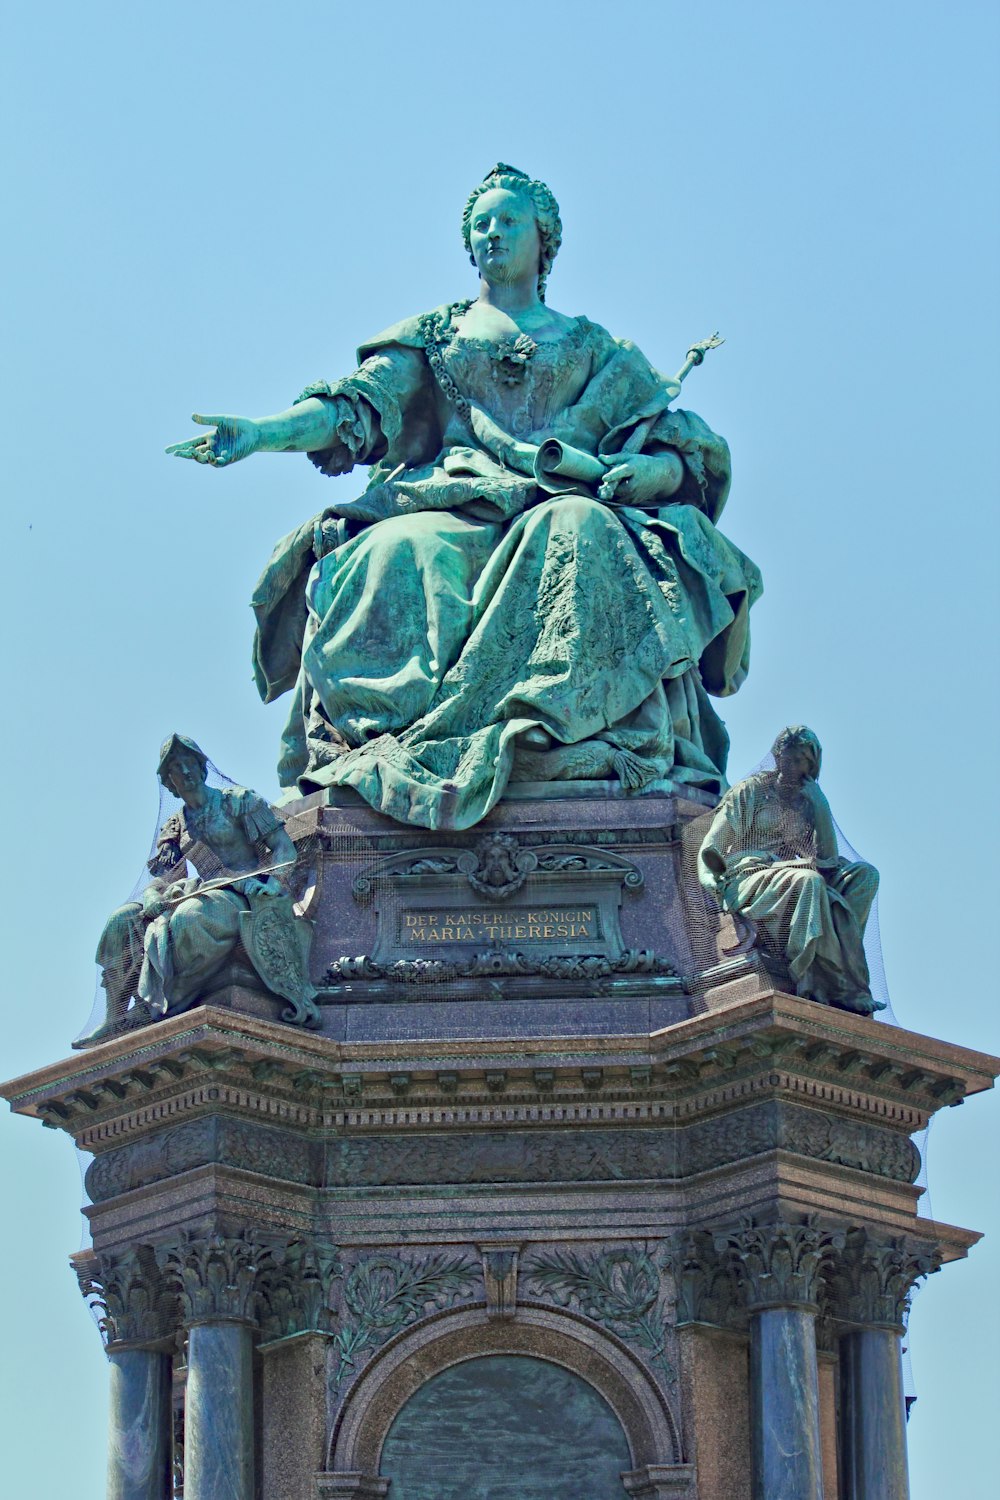 a statue of a woman sitting on top of a clock tower